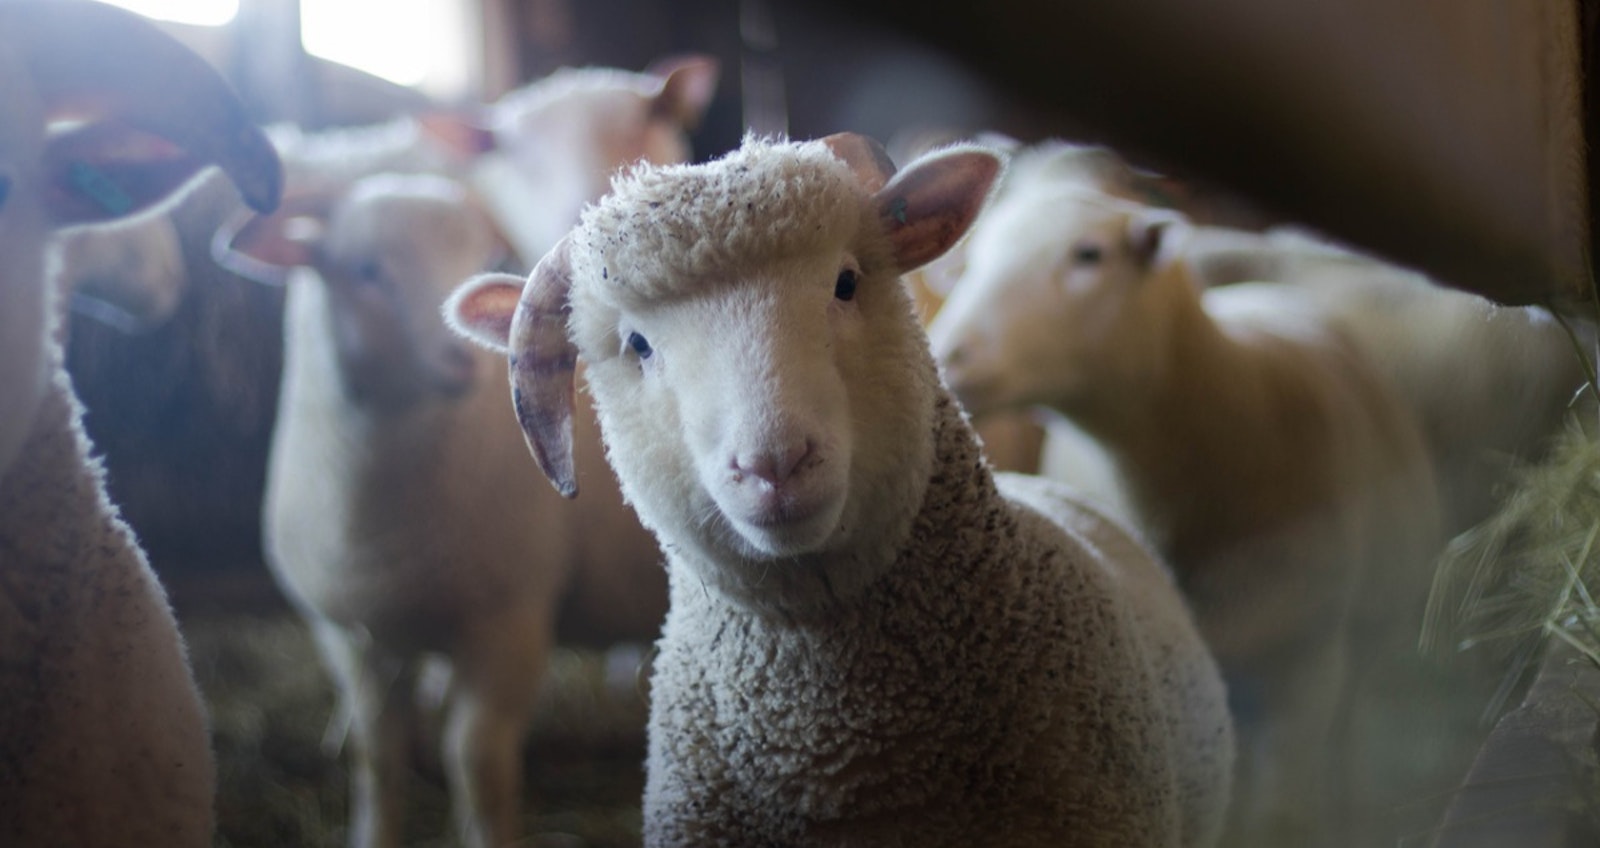 Yarn and Knitting Facts You Probably Never Knew - Brown Sheep Company, Inc.